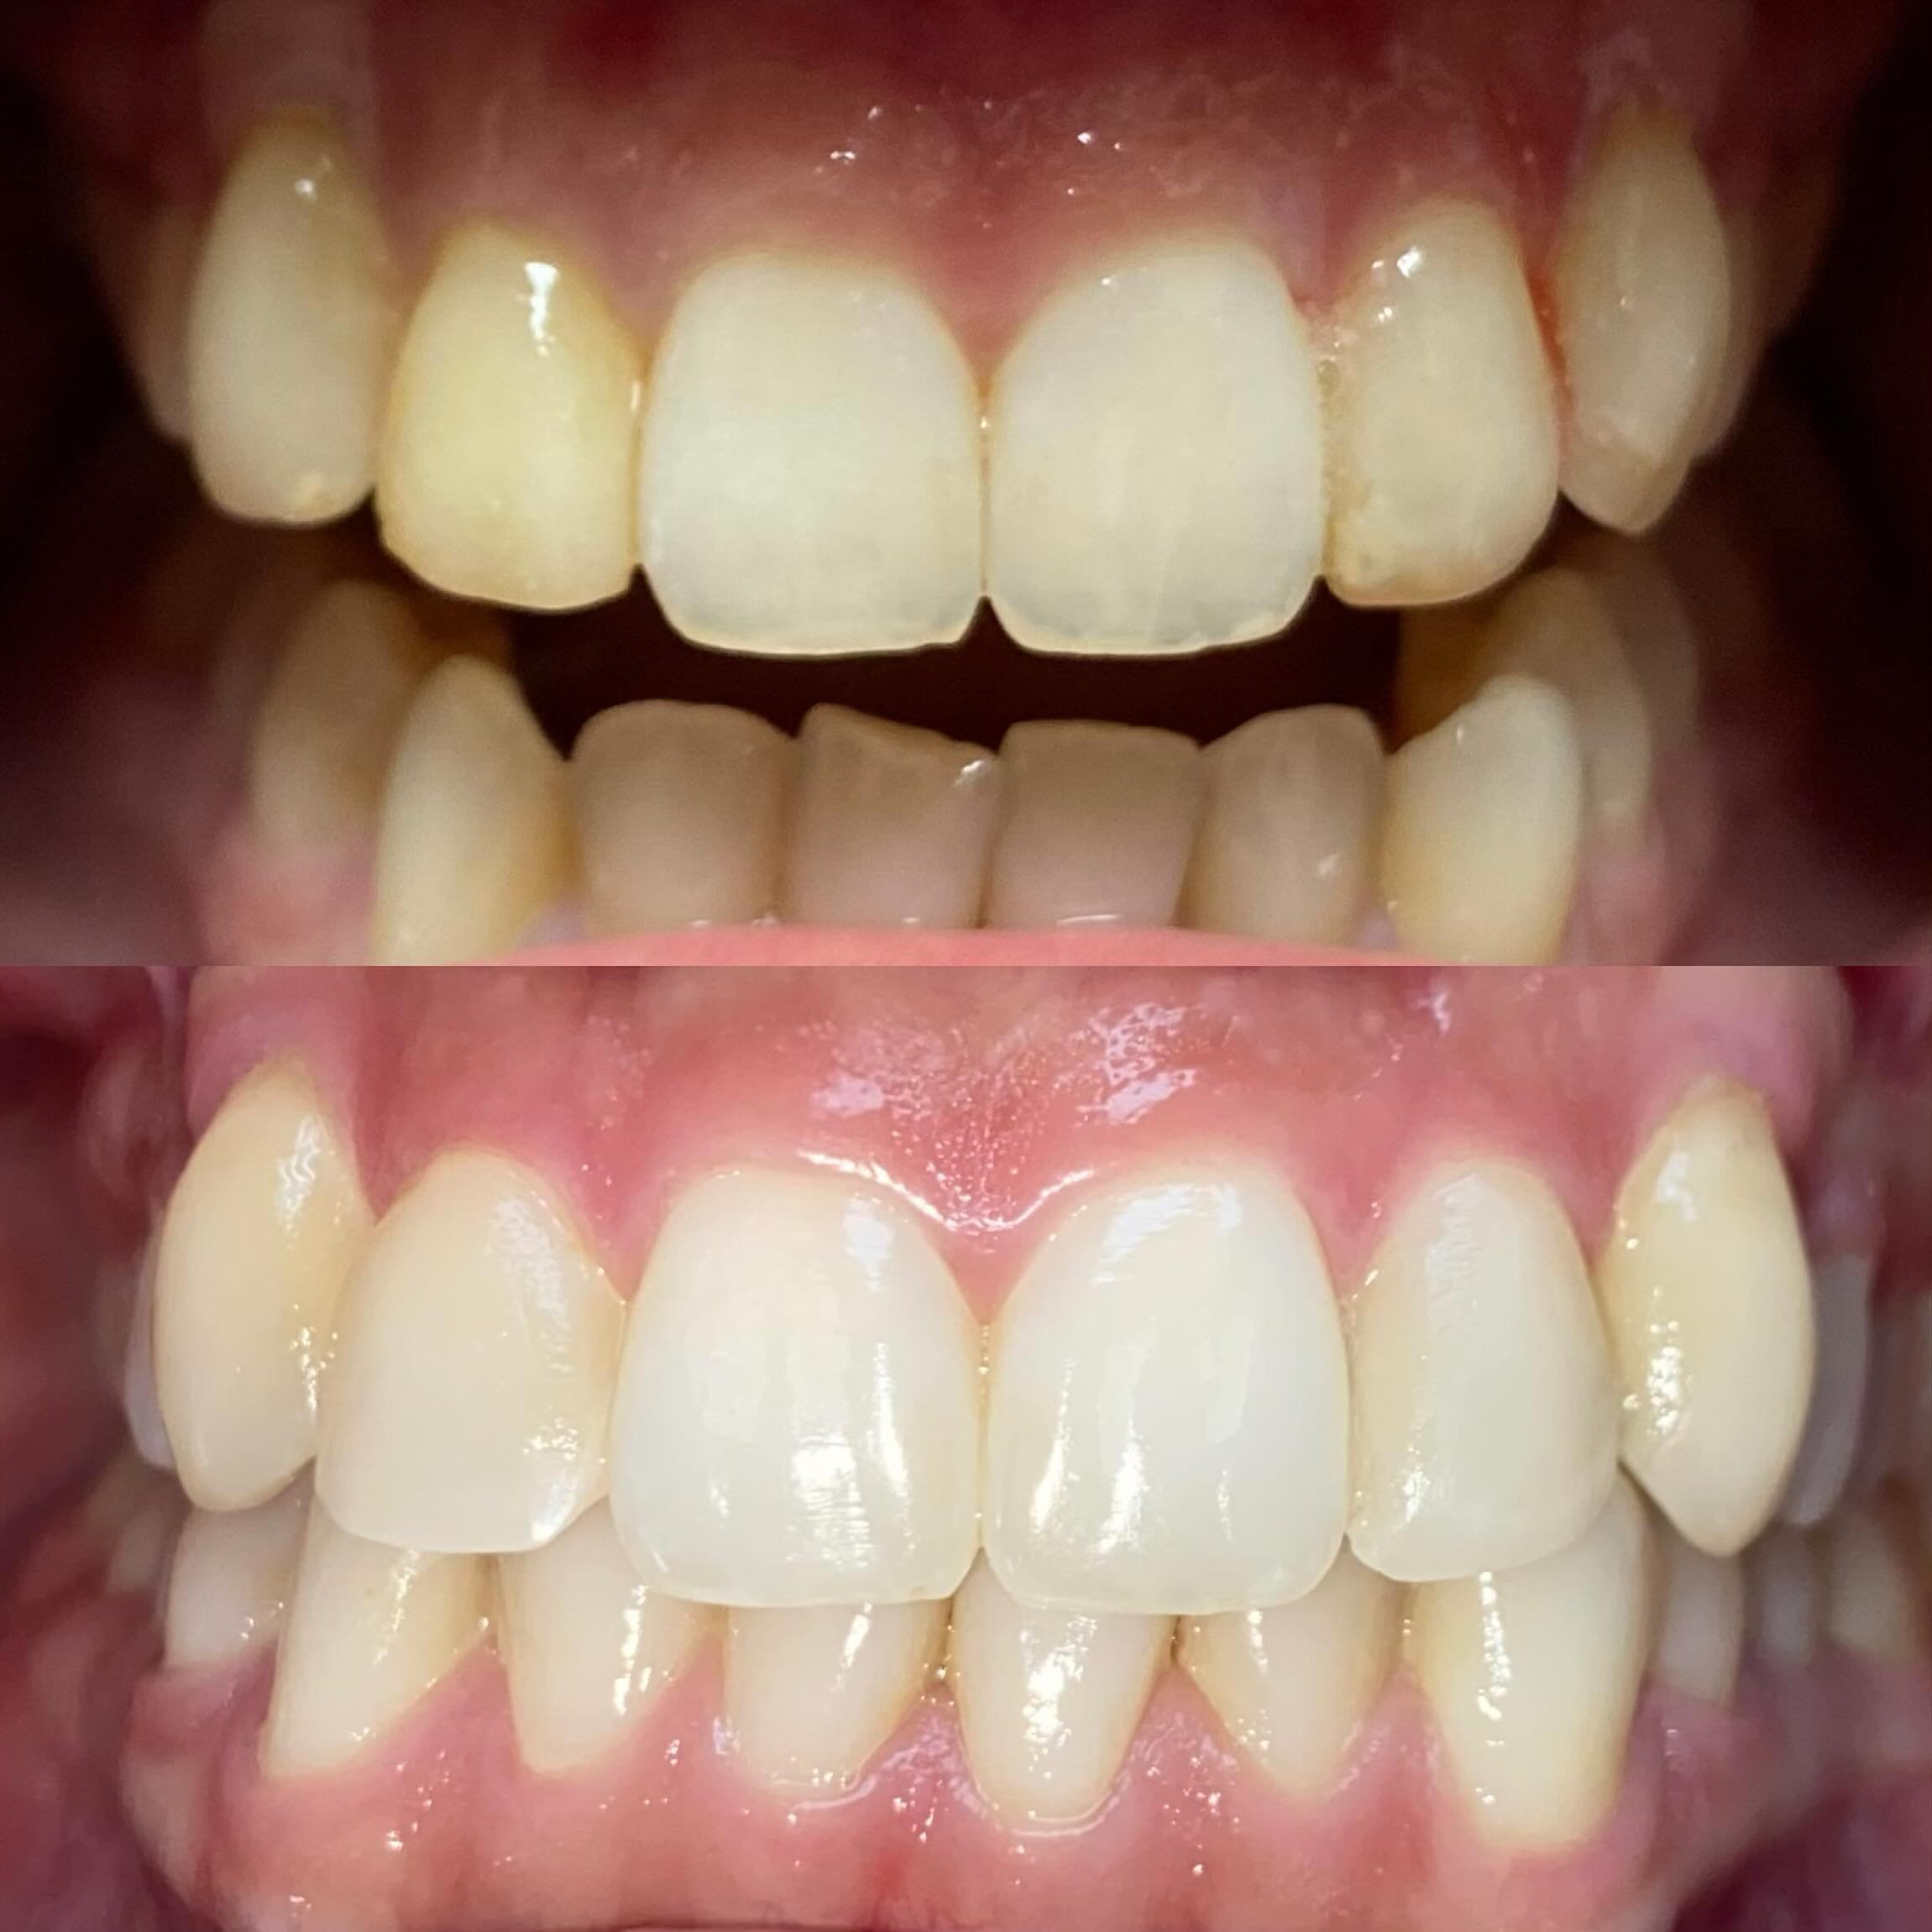 Old resin veneers #6, 7, 10, 11 that are matted and staining with bulky contours. After some bleaching, we removed the old bonded resin and layered the new resin veneers free handed. It&rsquo;s not my favorite cosmetic approach, as I love porcelain t